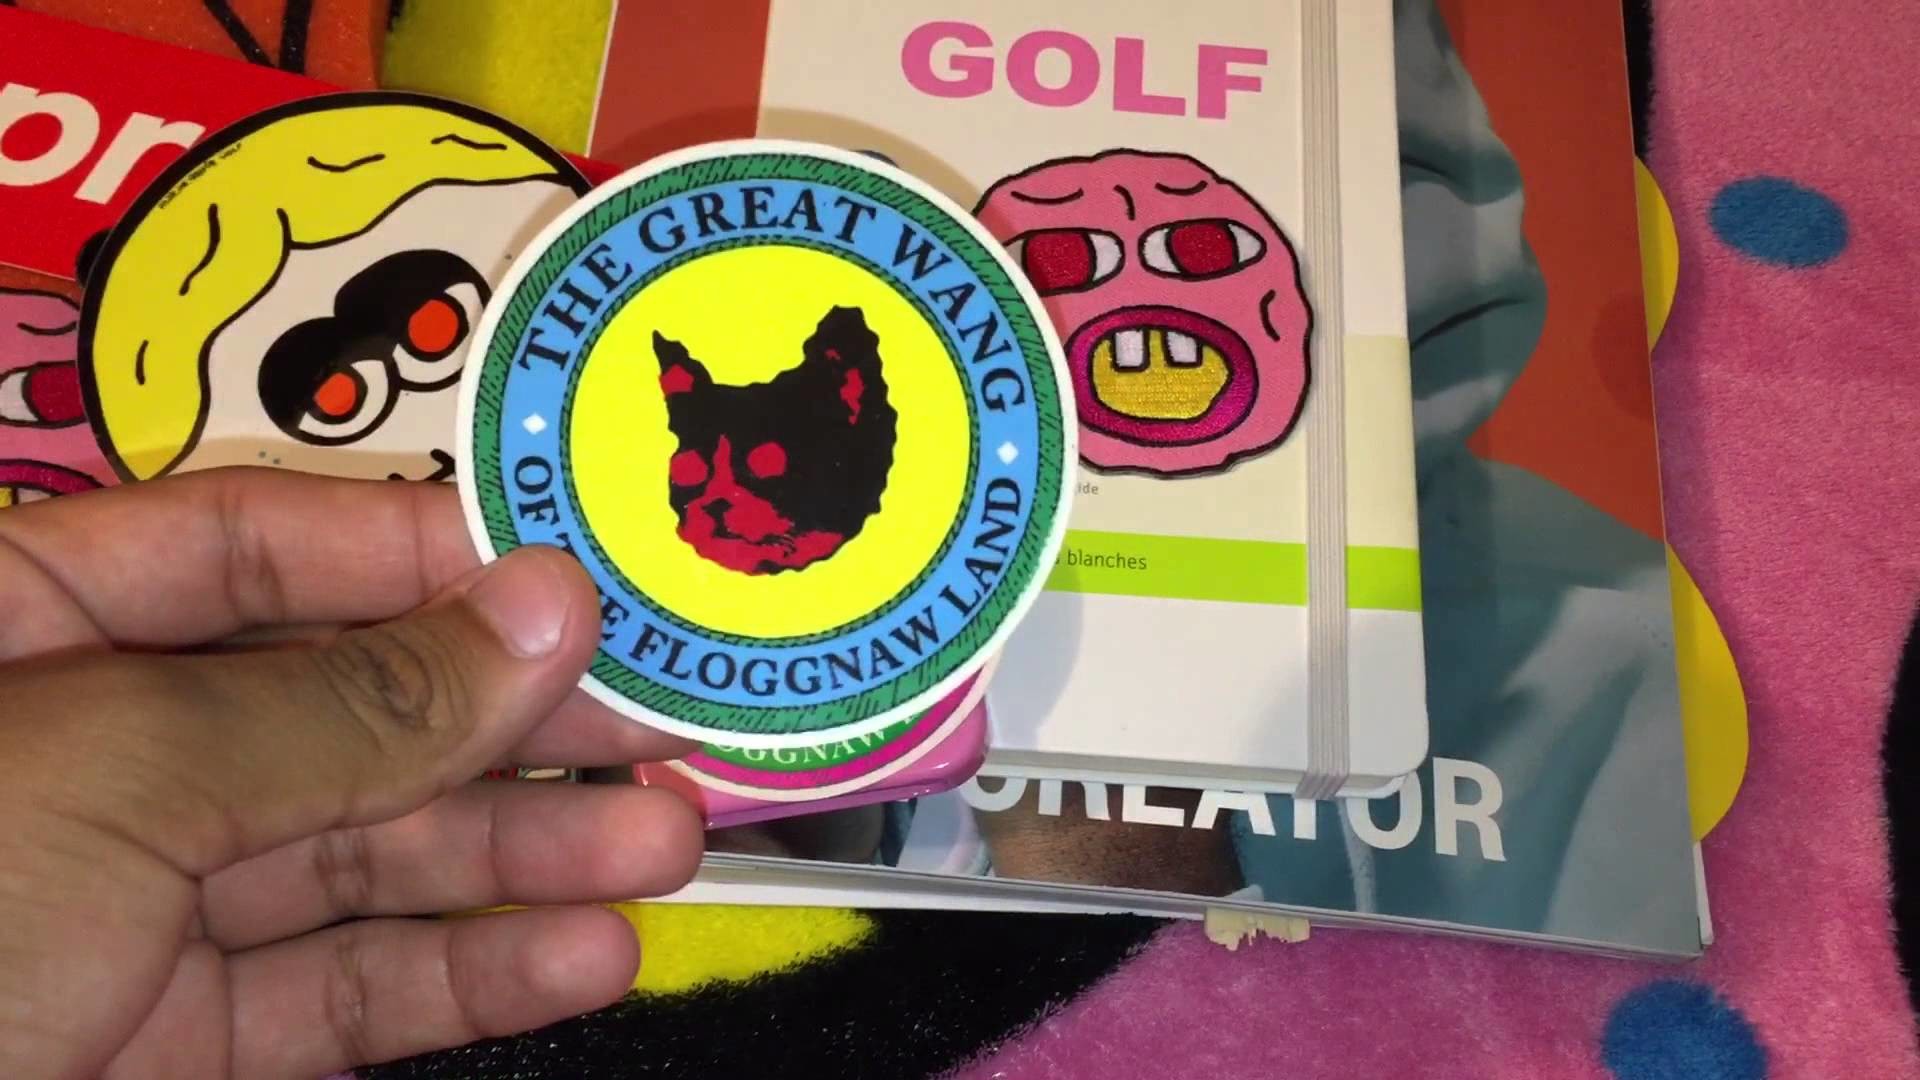 1920x1080 Golf Wang / Odd Future / Supreme Accessories And Sticker Collection -  YouTube